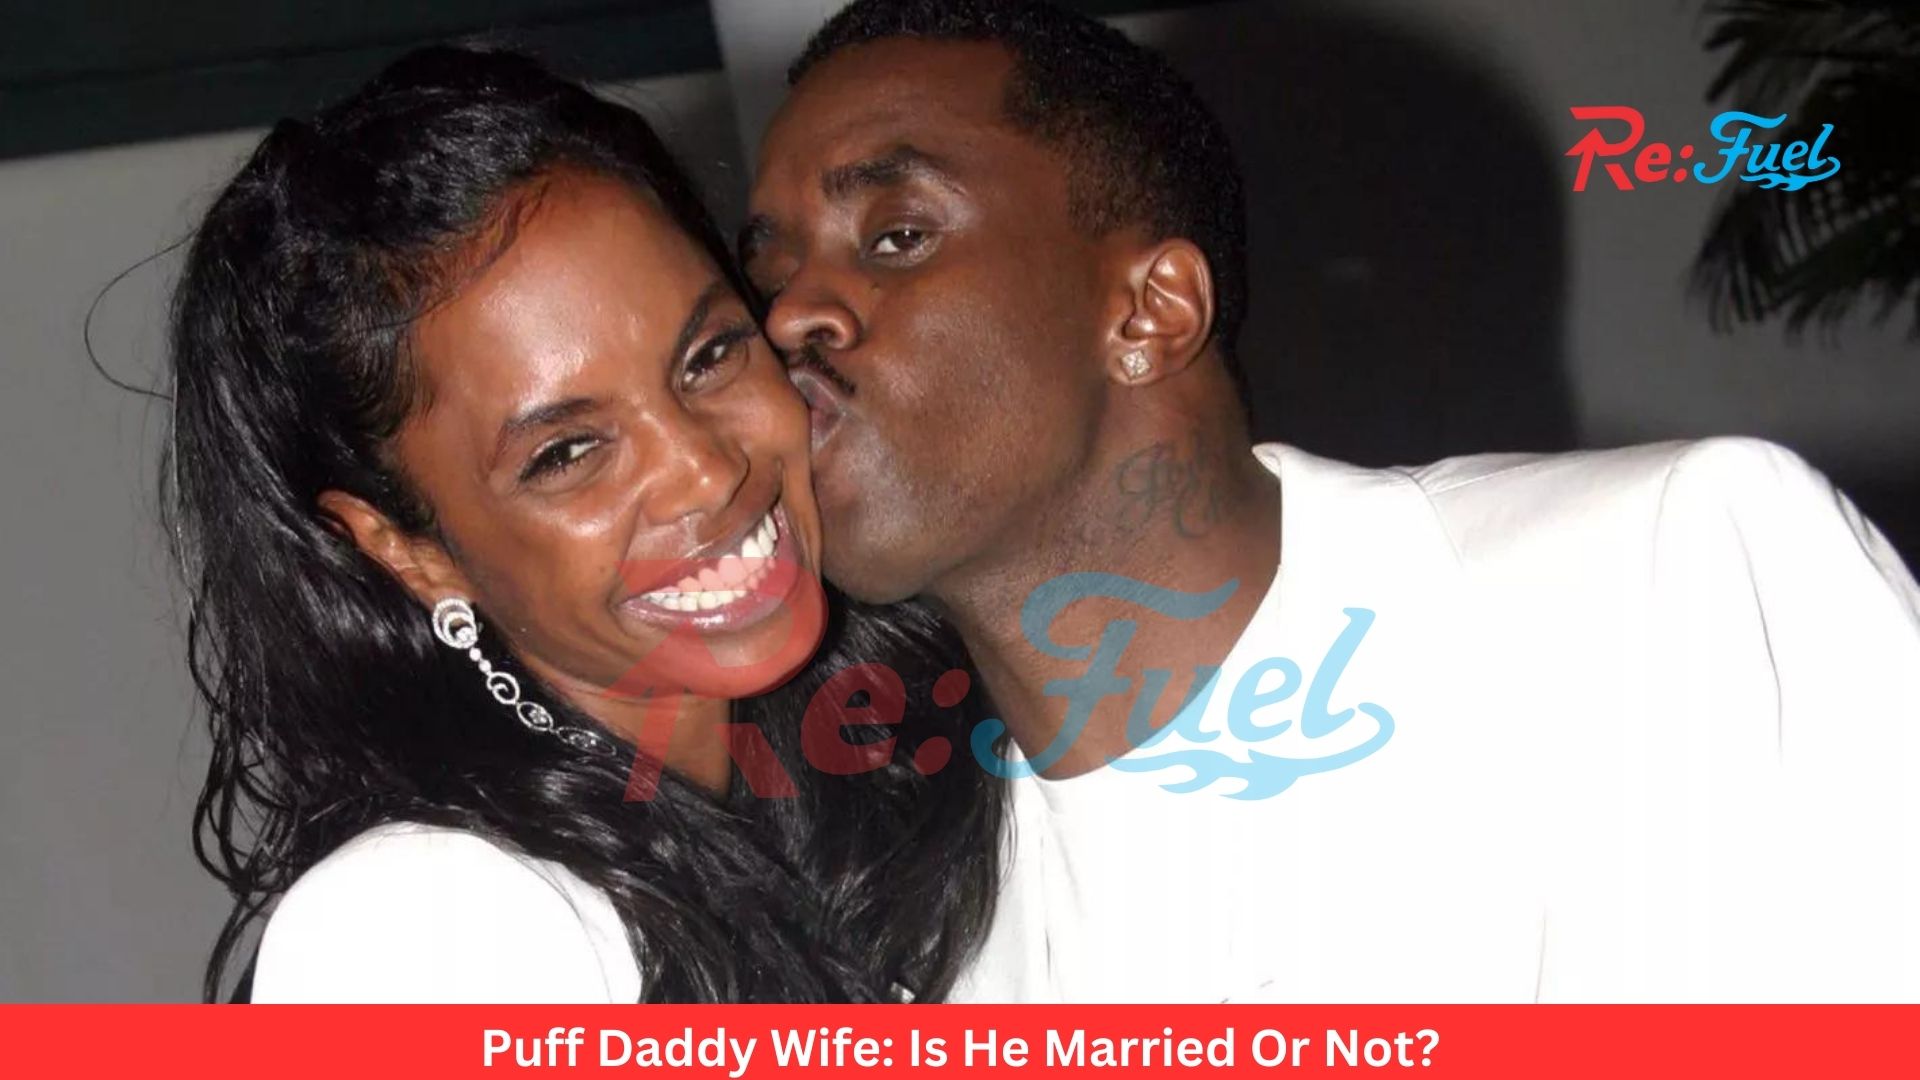 Puff Daddy Wife: Is He Married Or Not?